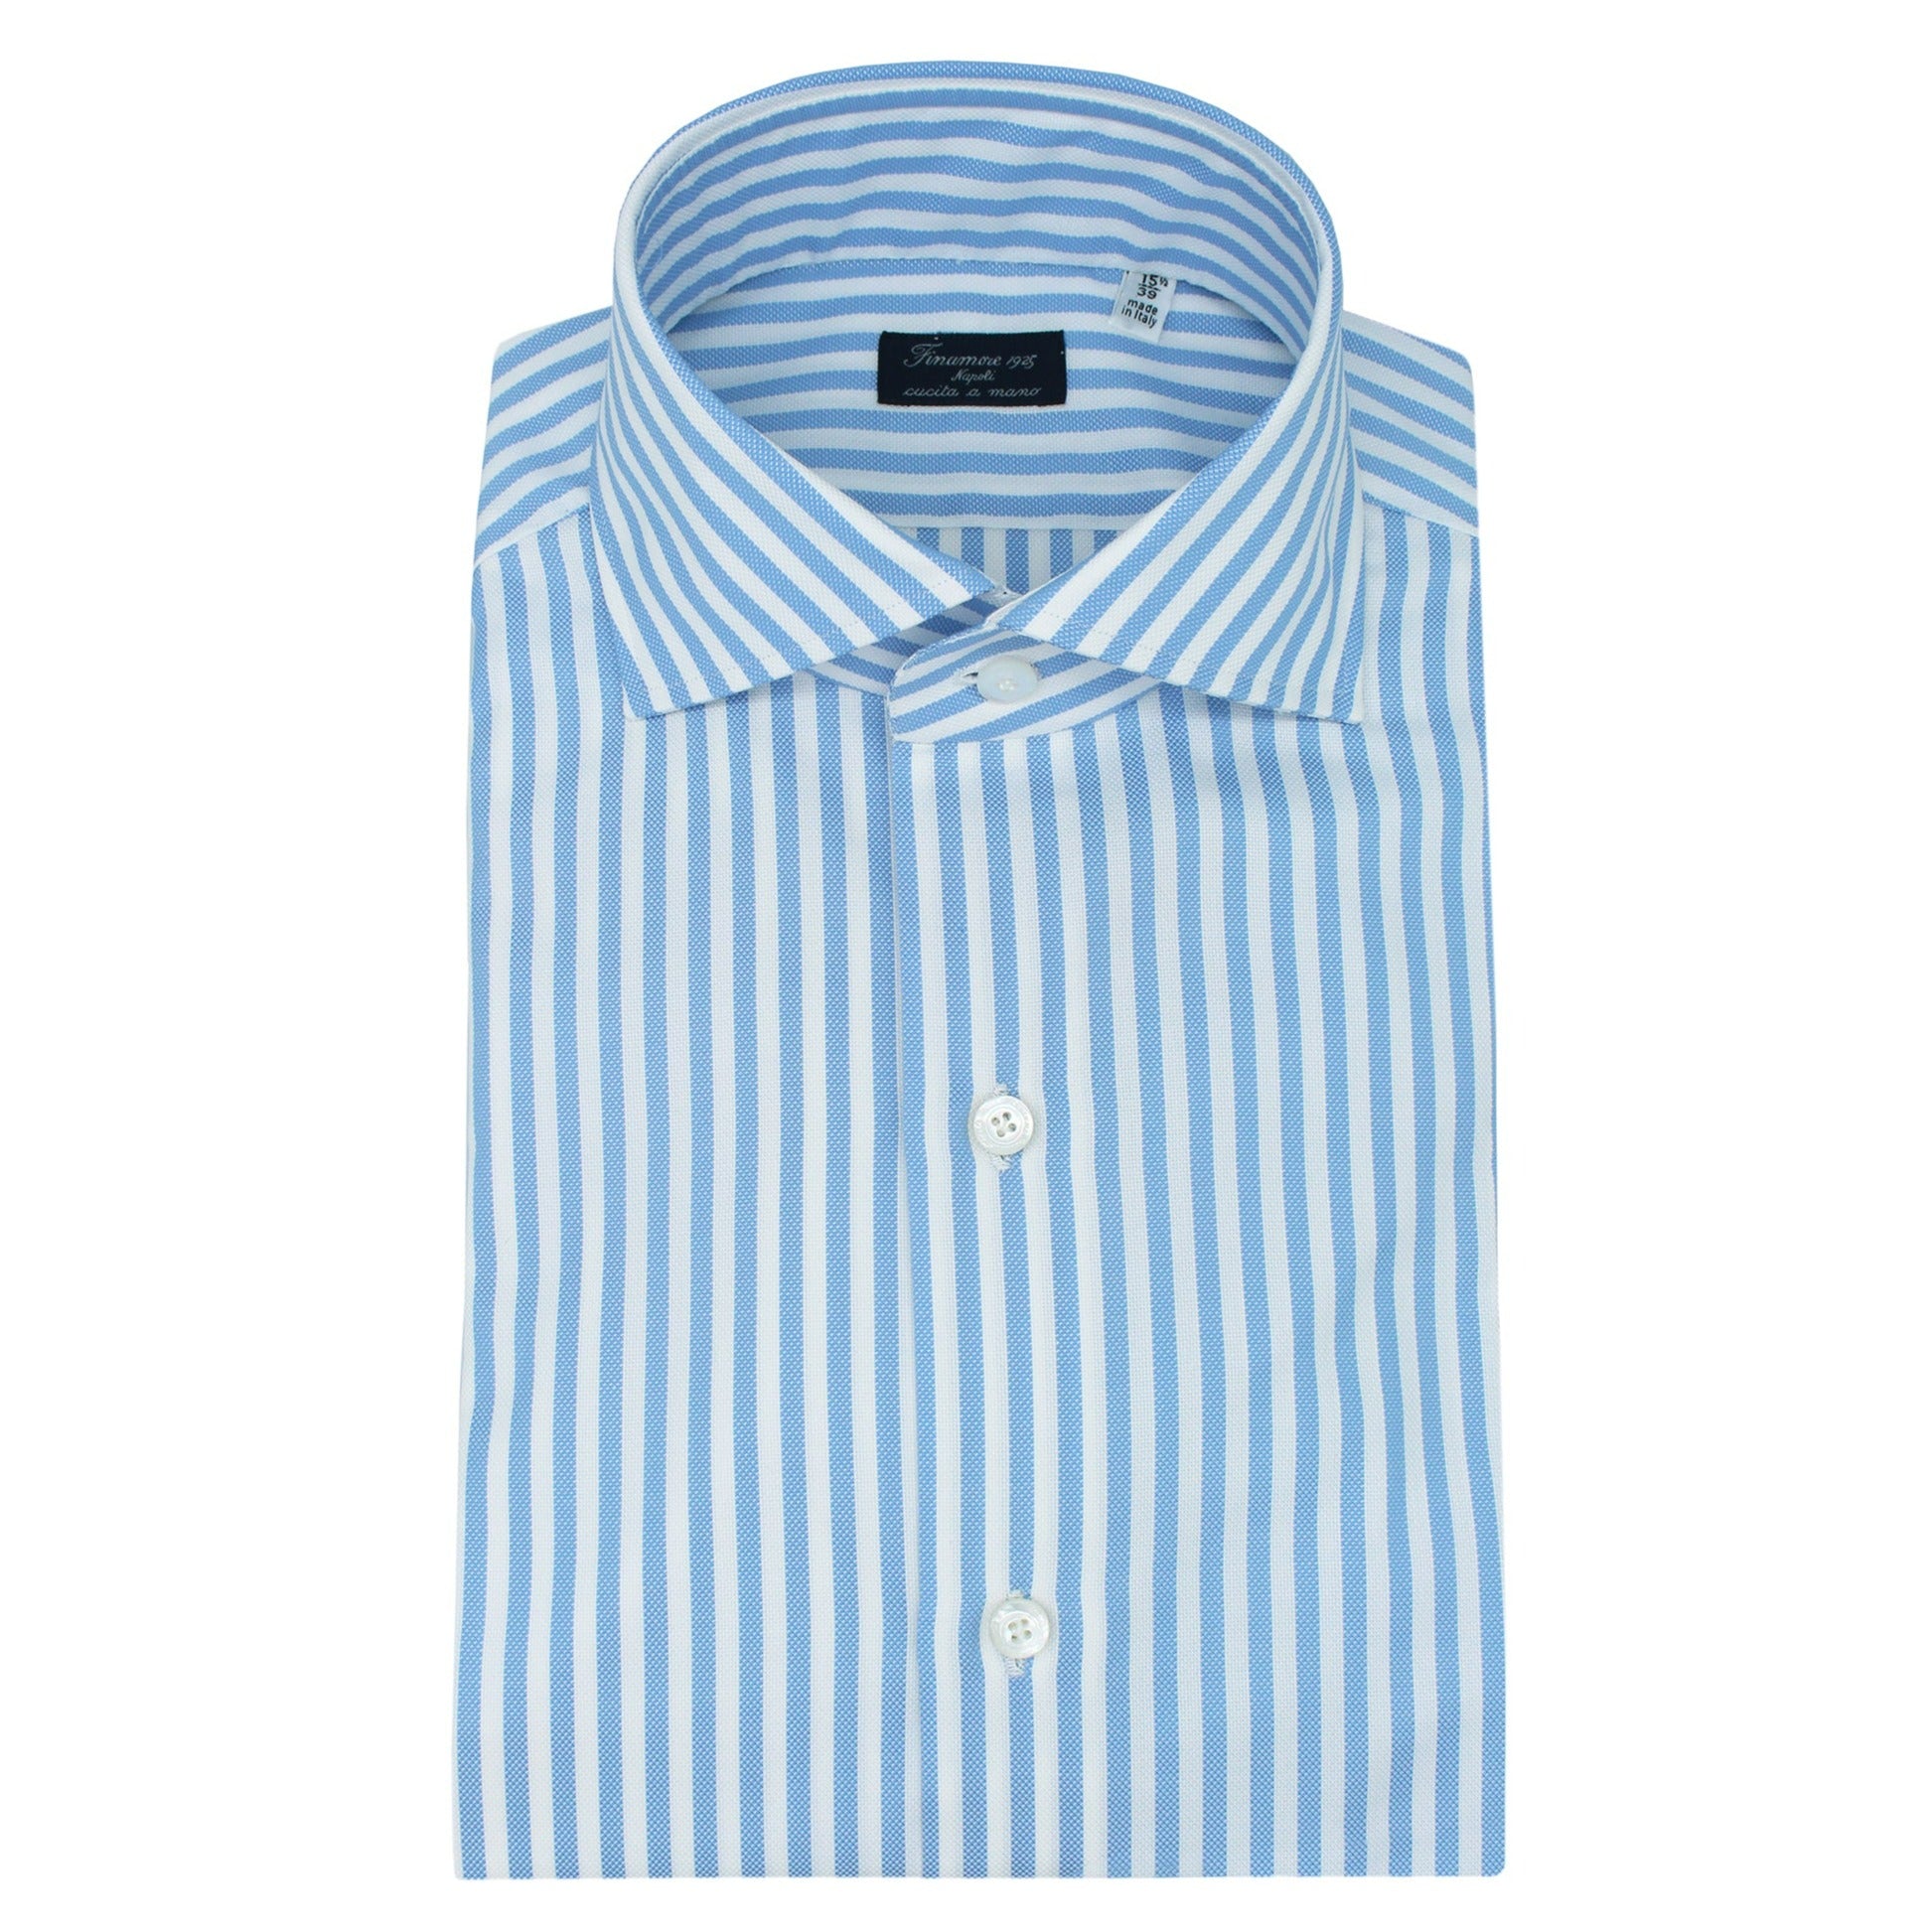 Classic fit Naples shirt with light blue wide stripes